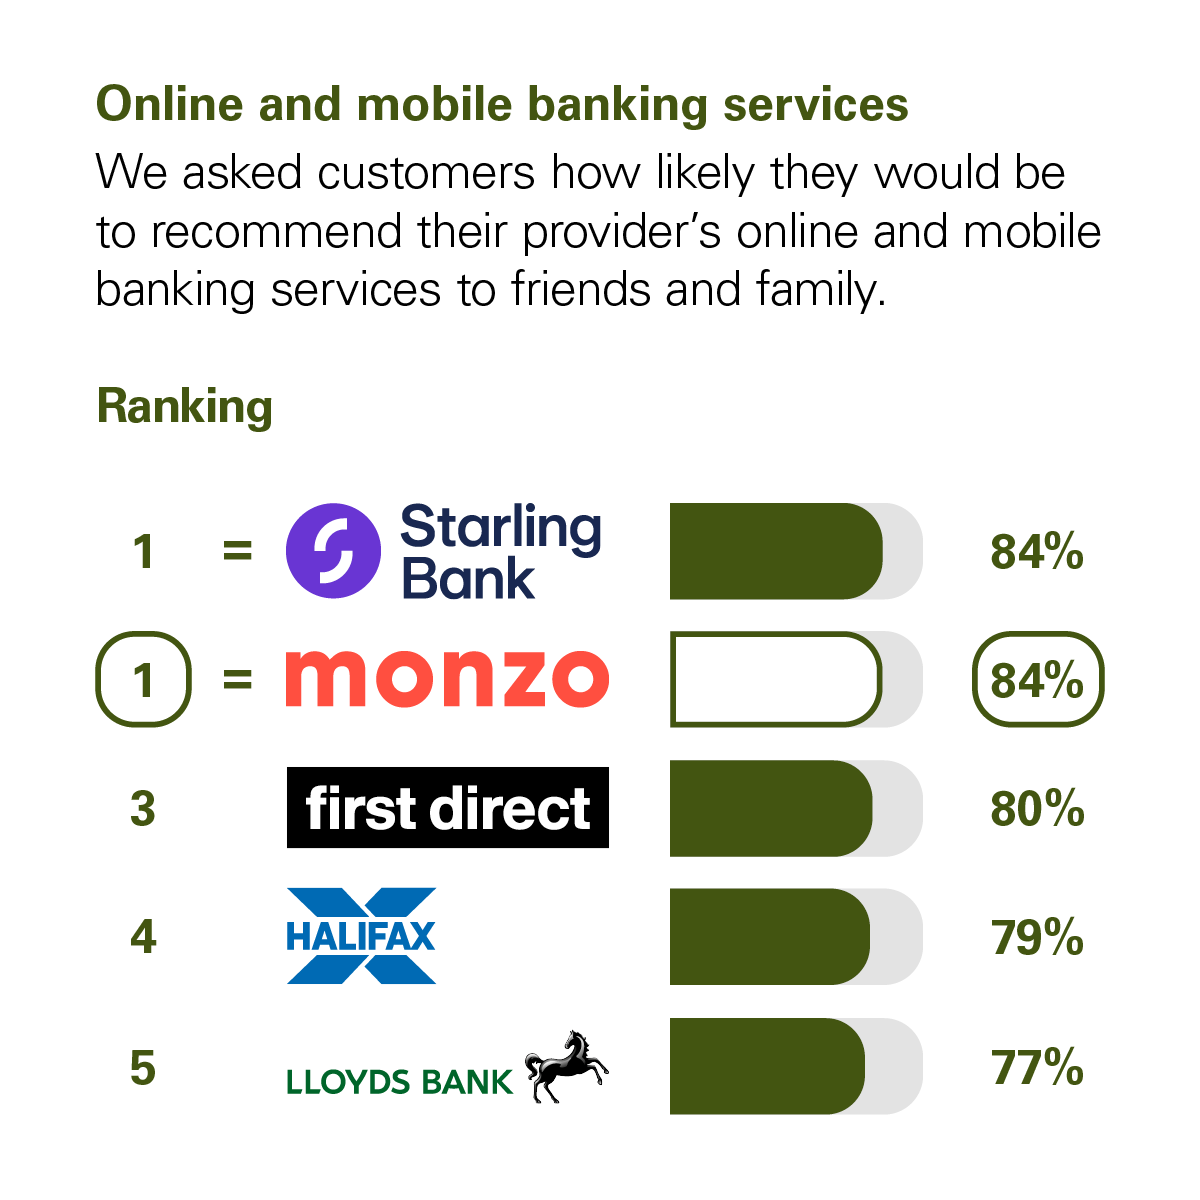 Graph showing the results of the CMA scoring of UK banks in the Online and Mobile Banking Services category. The CMA asked customers how likely they would be to recommend their provider's online and mobile banking services to friends and family. The rankings with percentage scores are: Joint 1st Monzo and Starling Bank with 84%. 3rd First Direct with 80%. 4th Halifax with 79%. 5th Lloyds Banks with 77%.